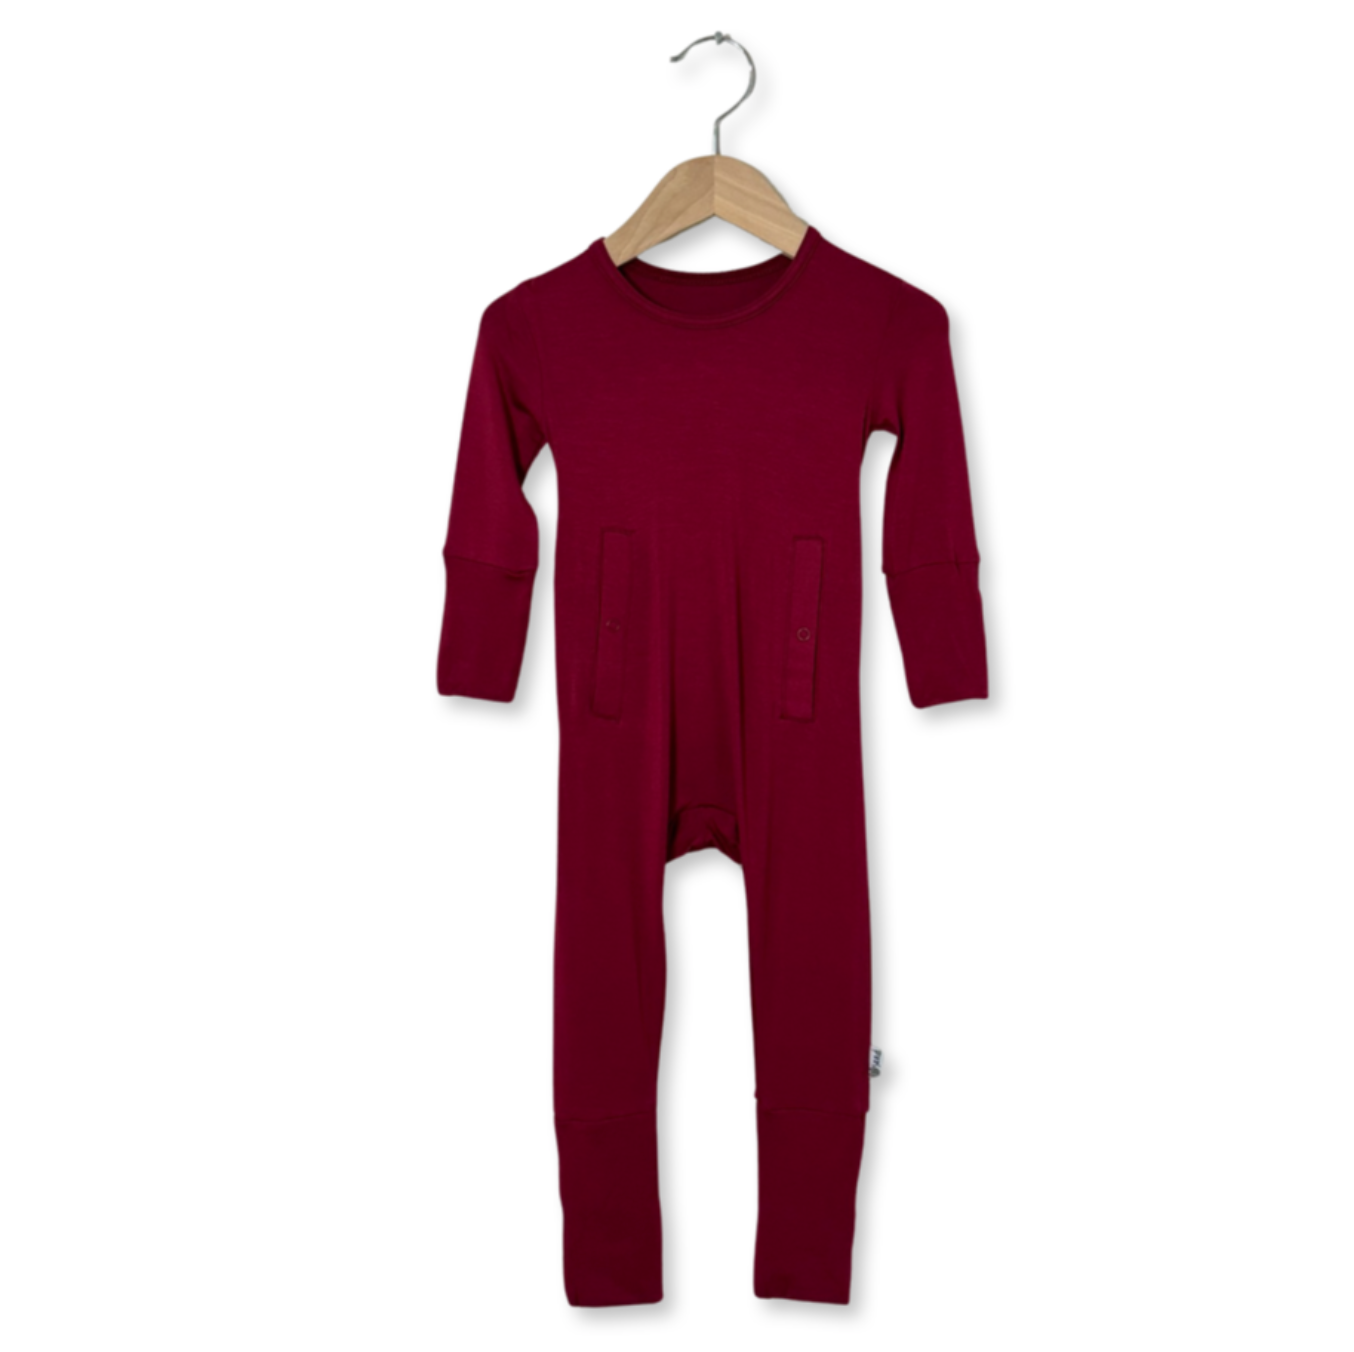 Cranberry Adaptive Tube Access with snaps Kid's Day to Night Romper